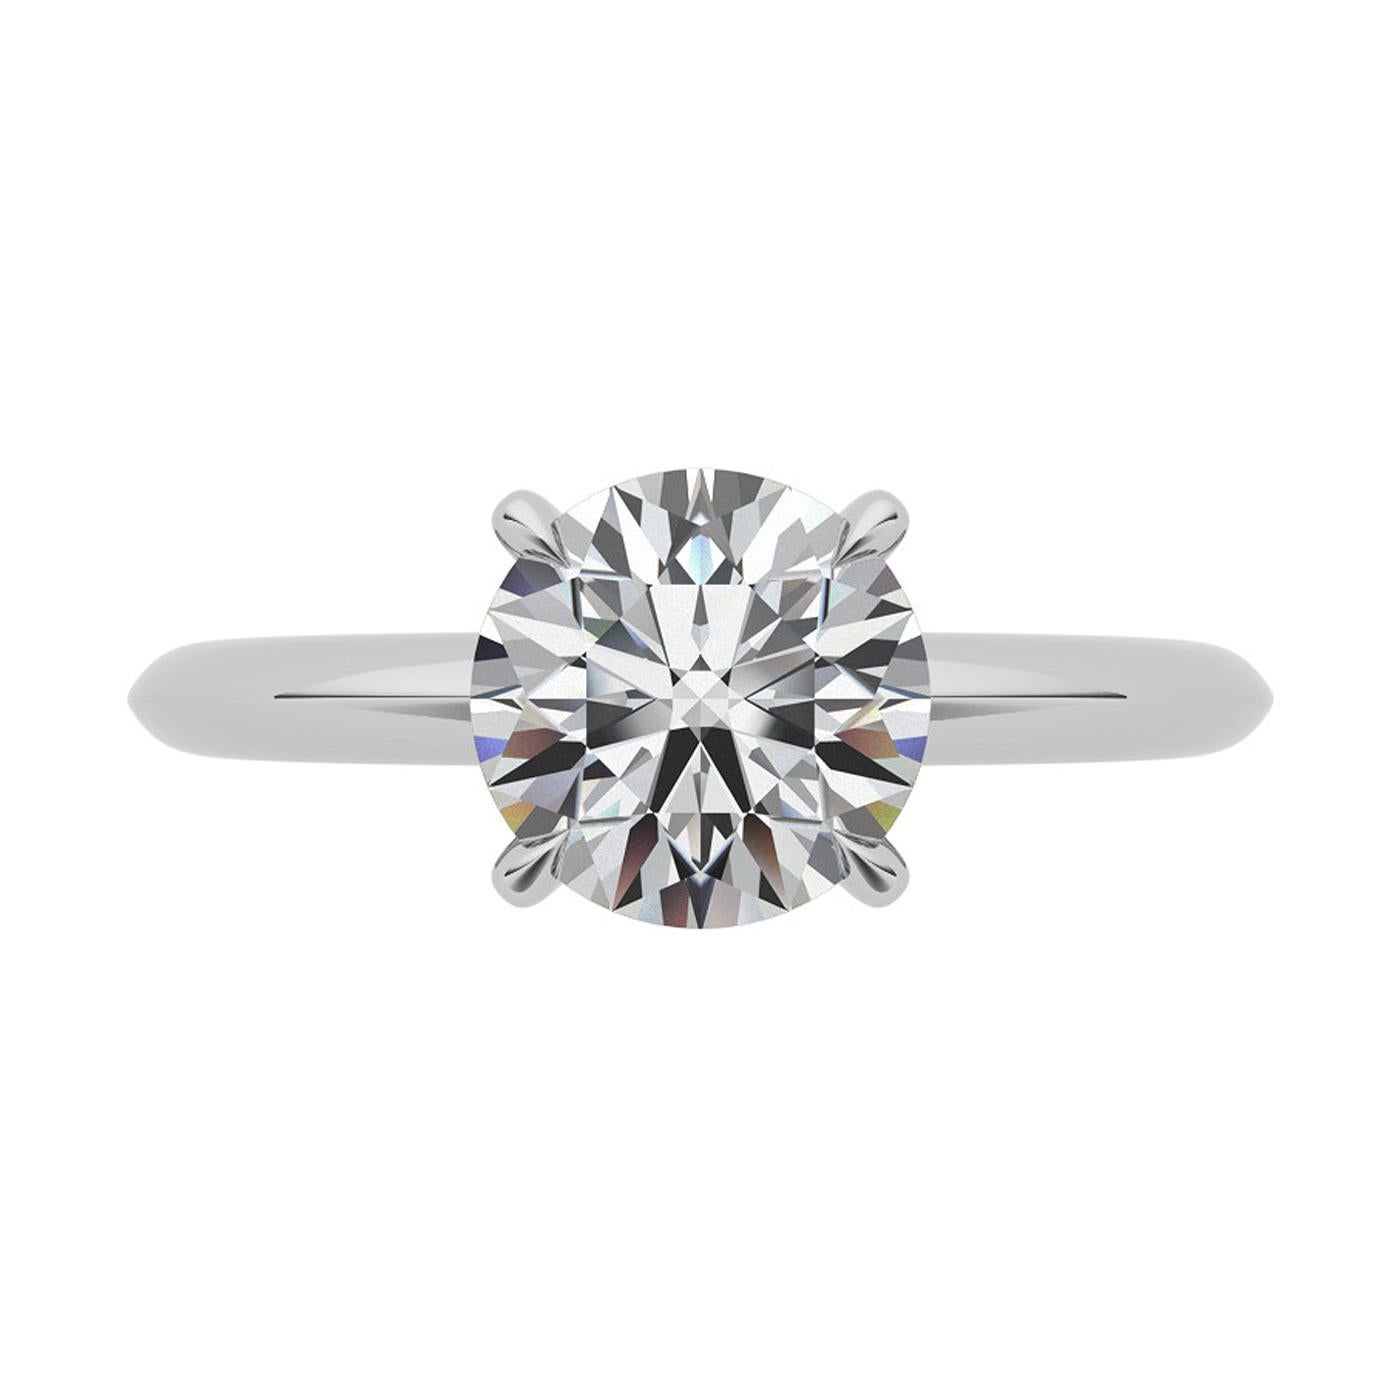 Modernist 2.41 Carat Natural Round Diamond Ring 4-Prong Tiffany Style in 14K White Gold For Sale